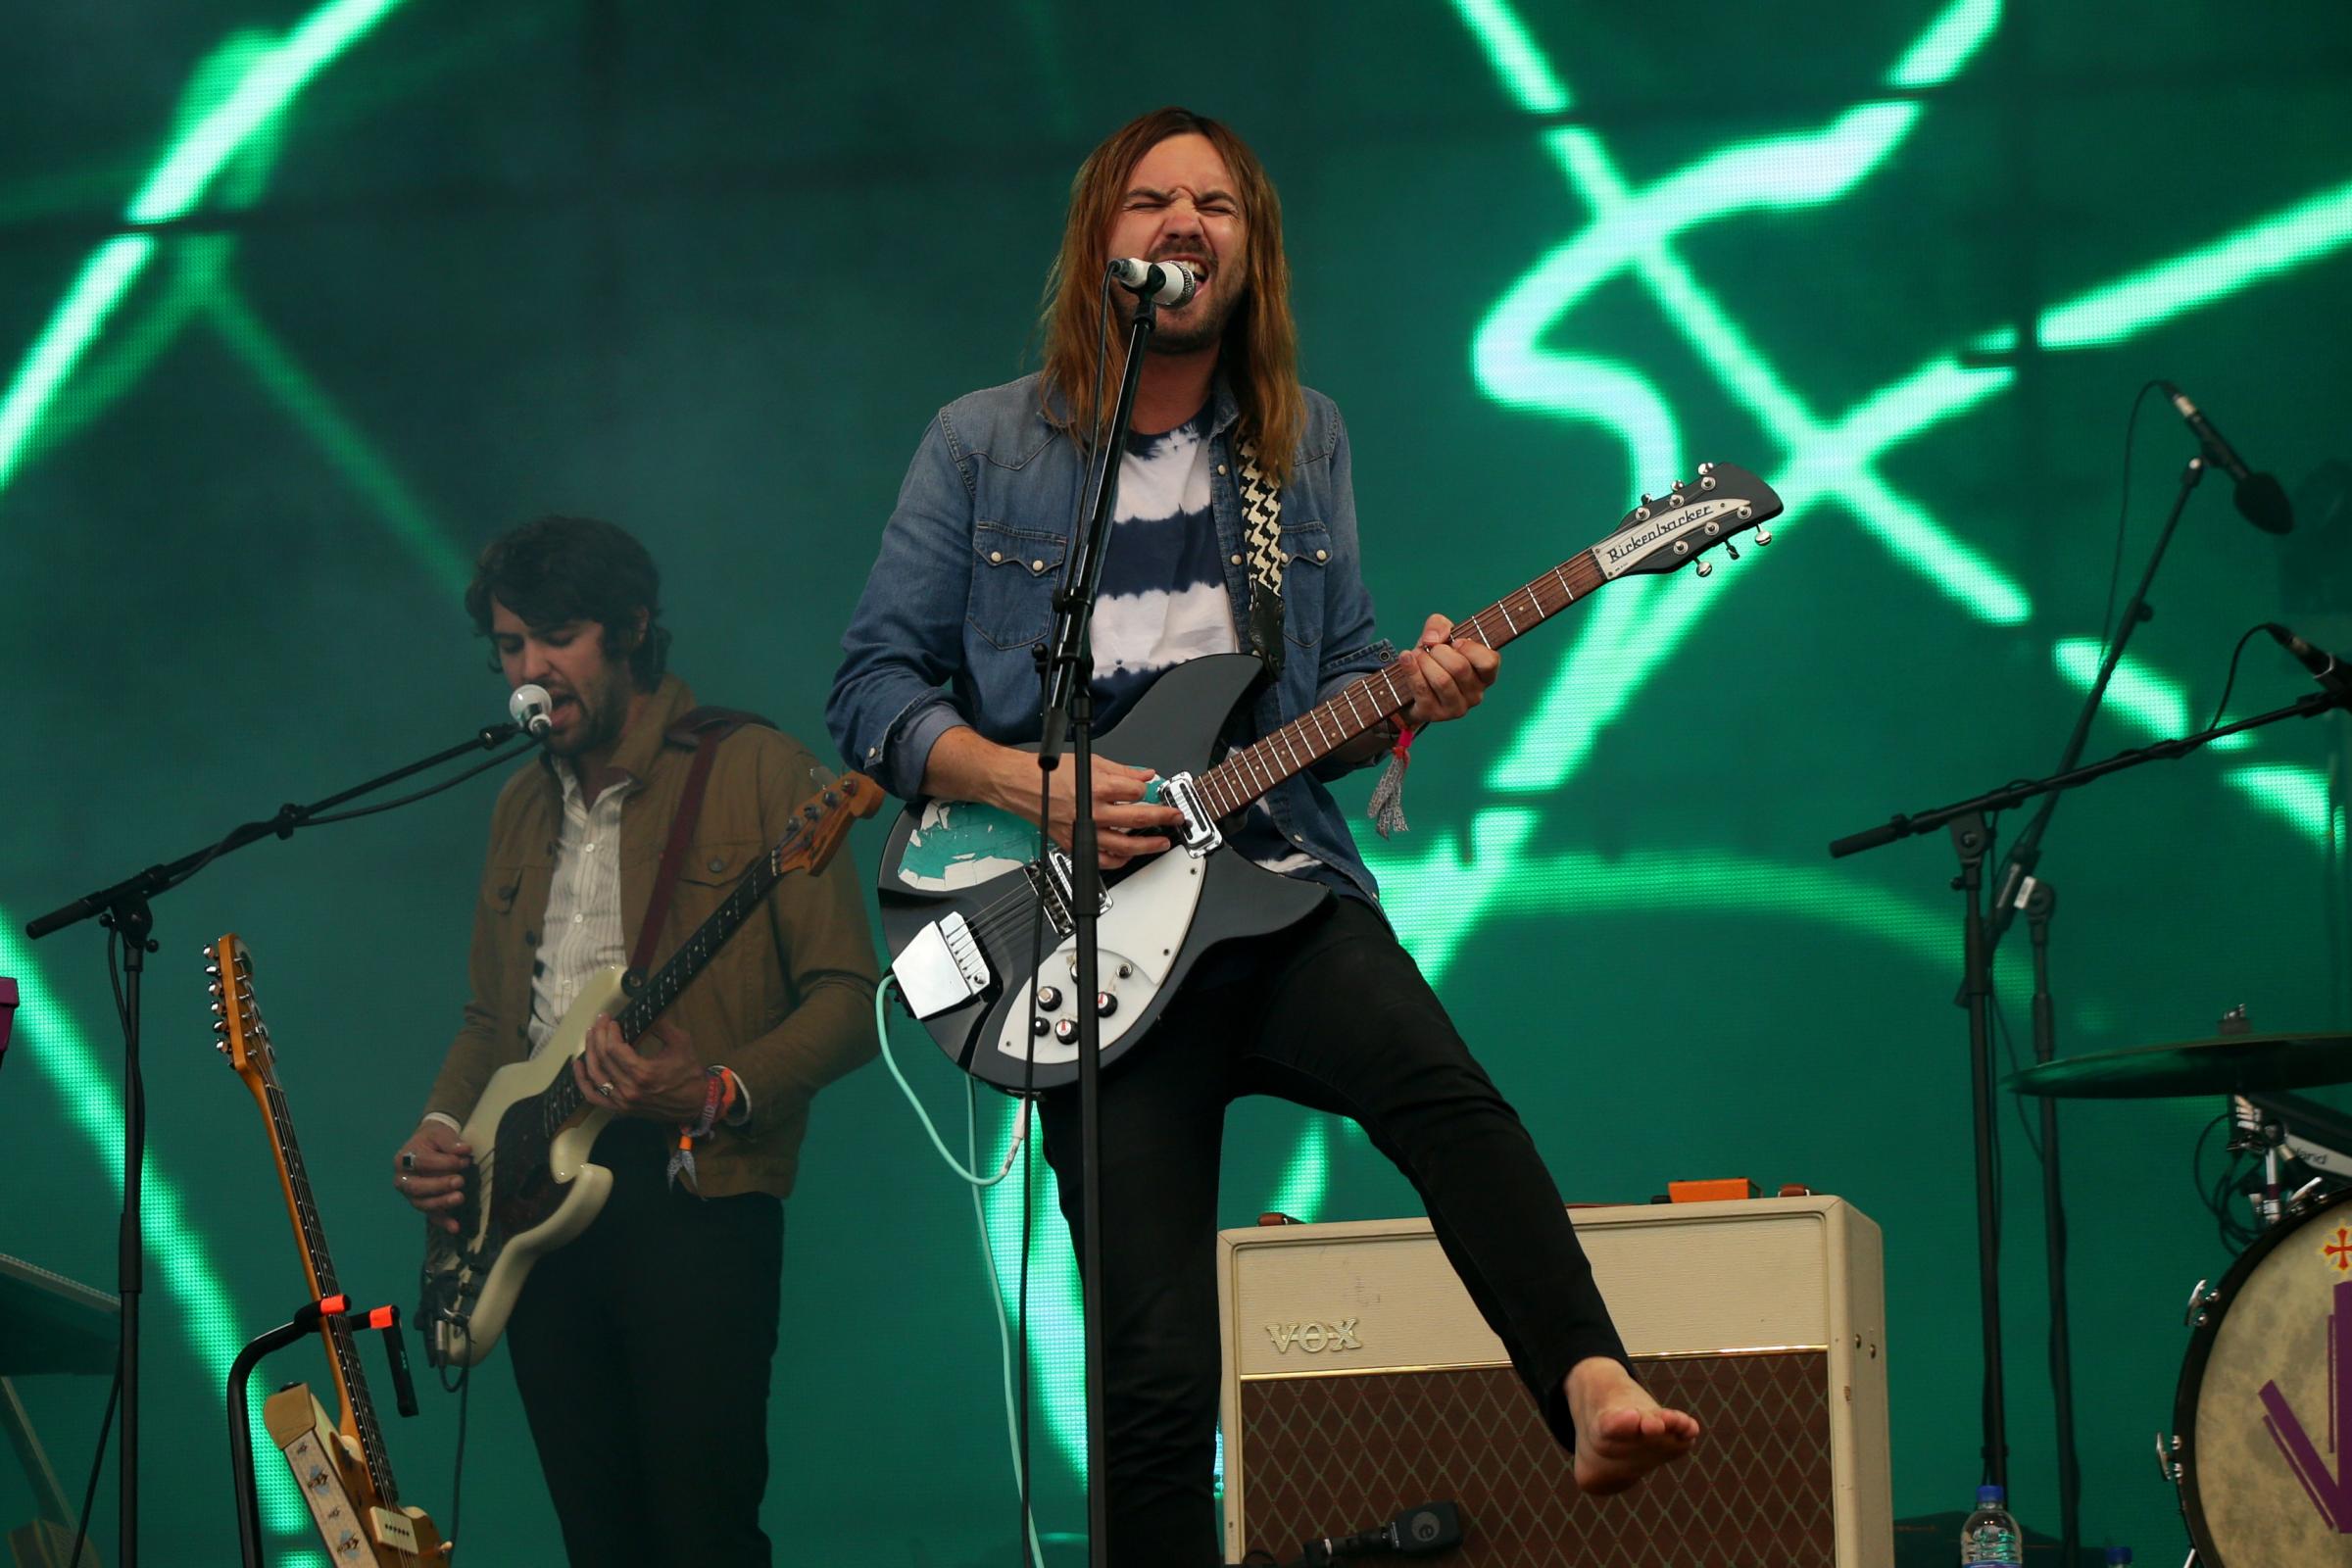 Tame Impala to perform at All Points East